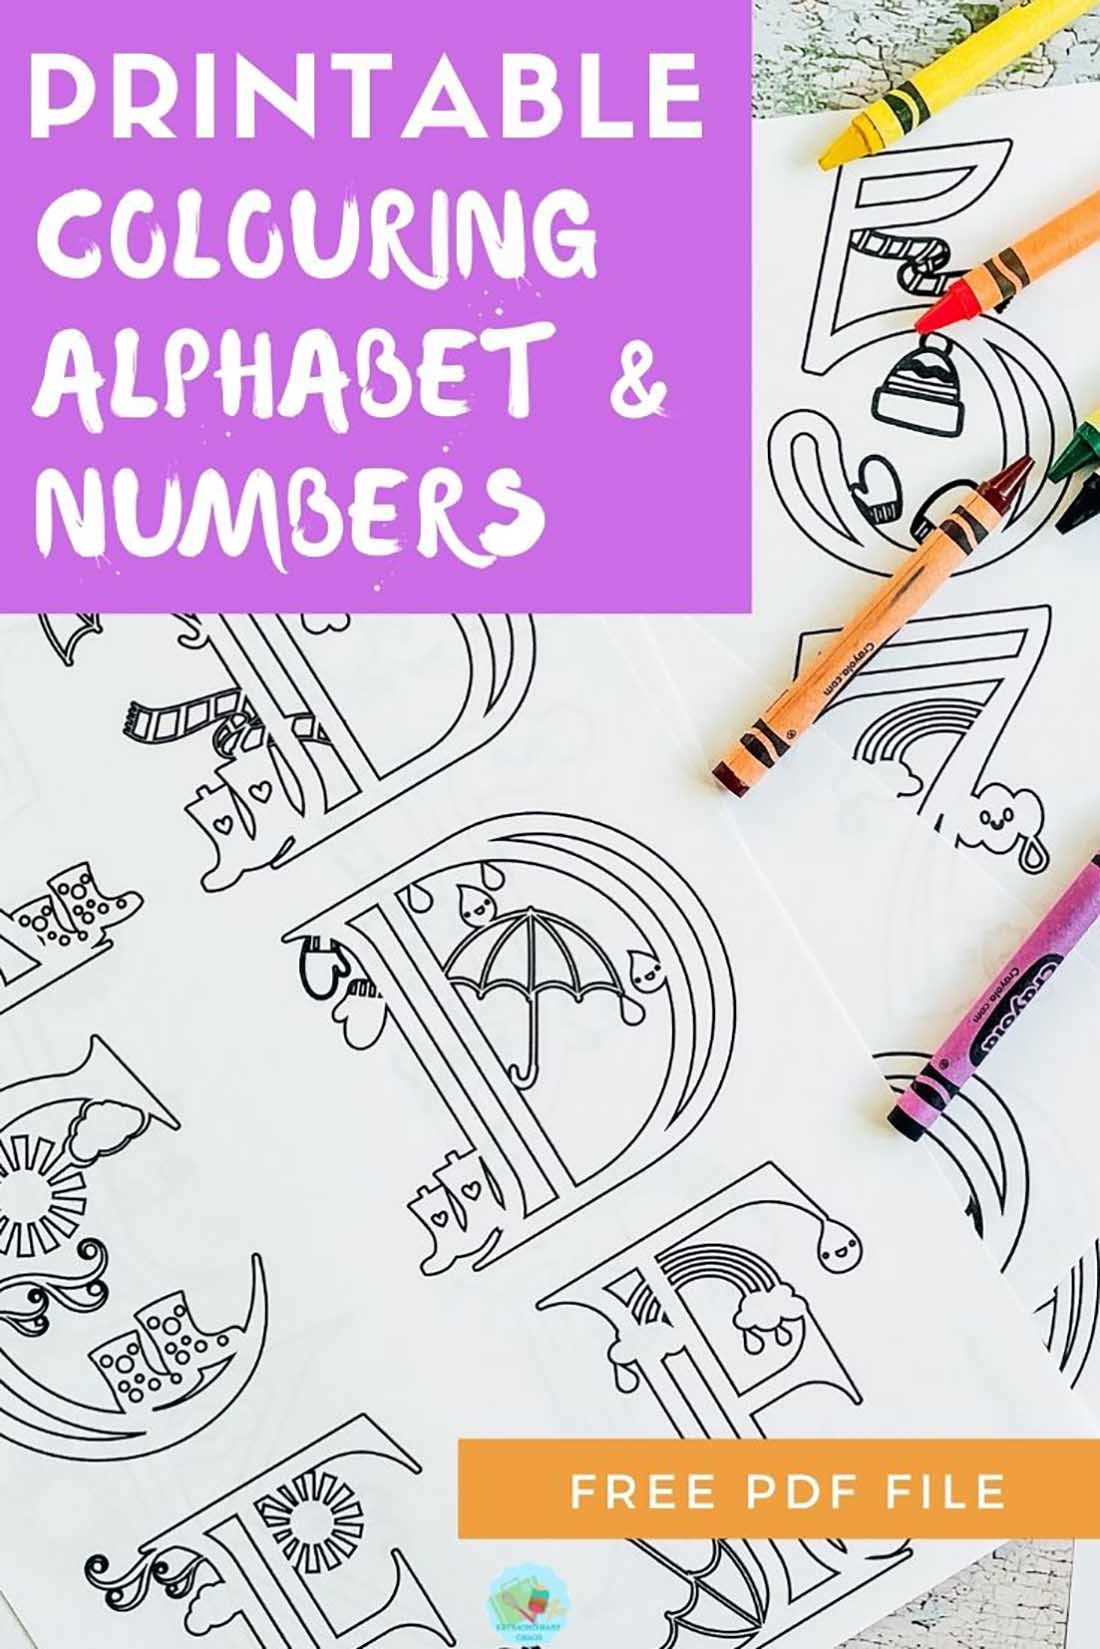 Free printable colouring alphabet and numbers for home school wi